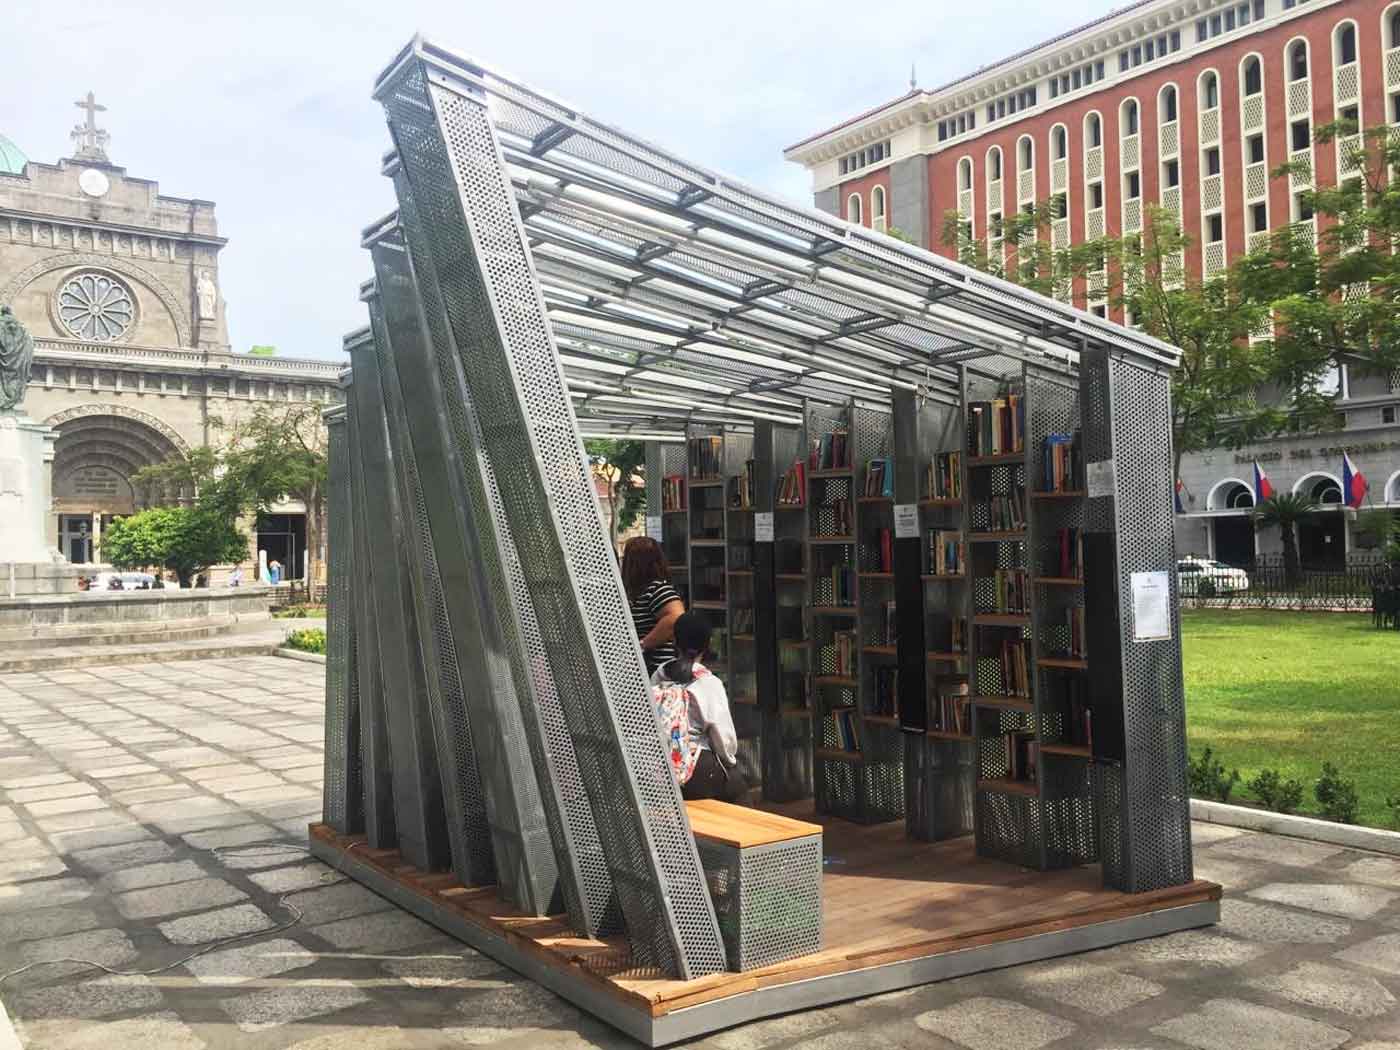 The Book Stop Project located in Plaza Roma, Intramuros is a pop up library